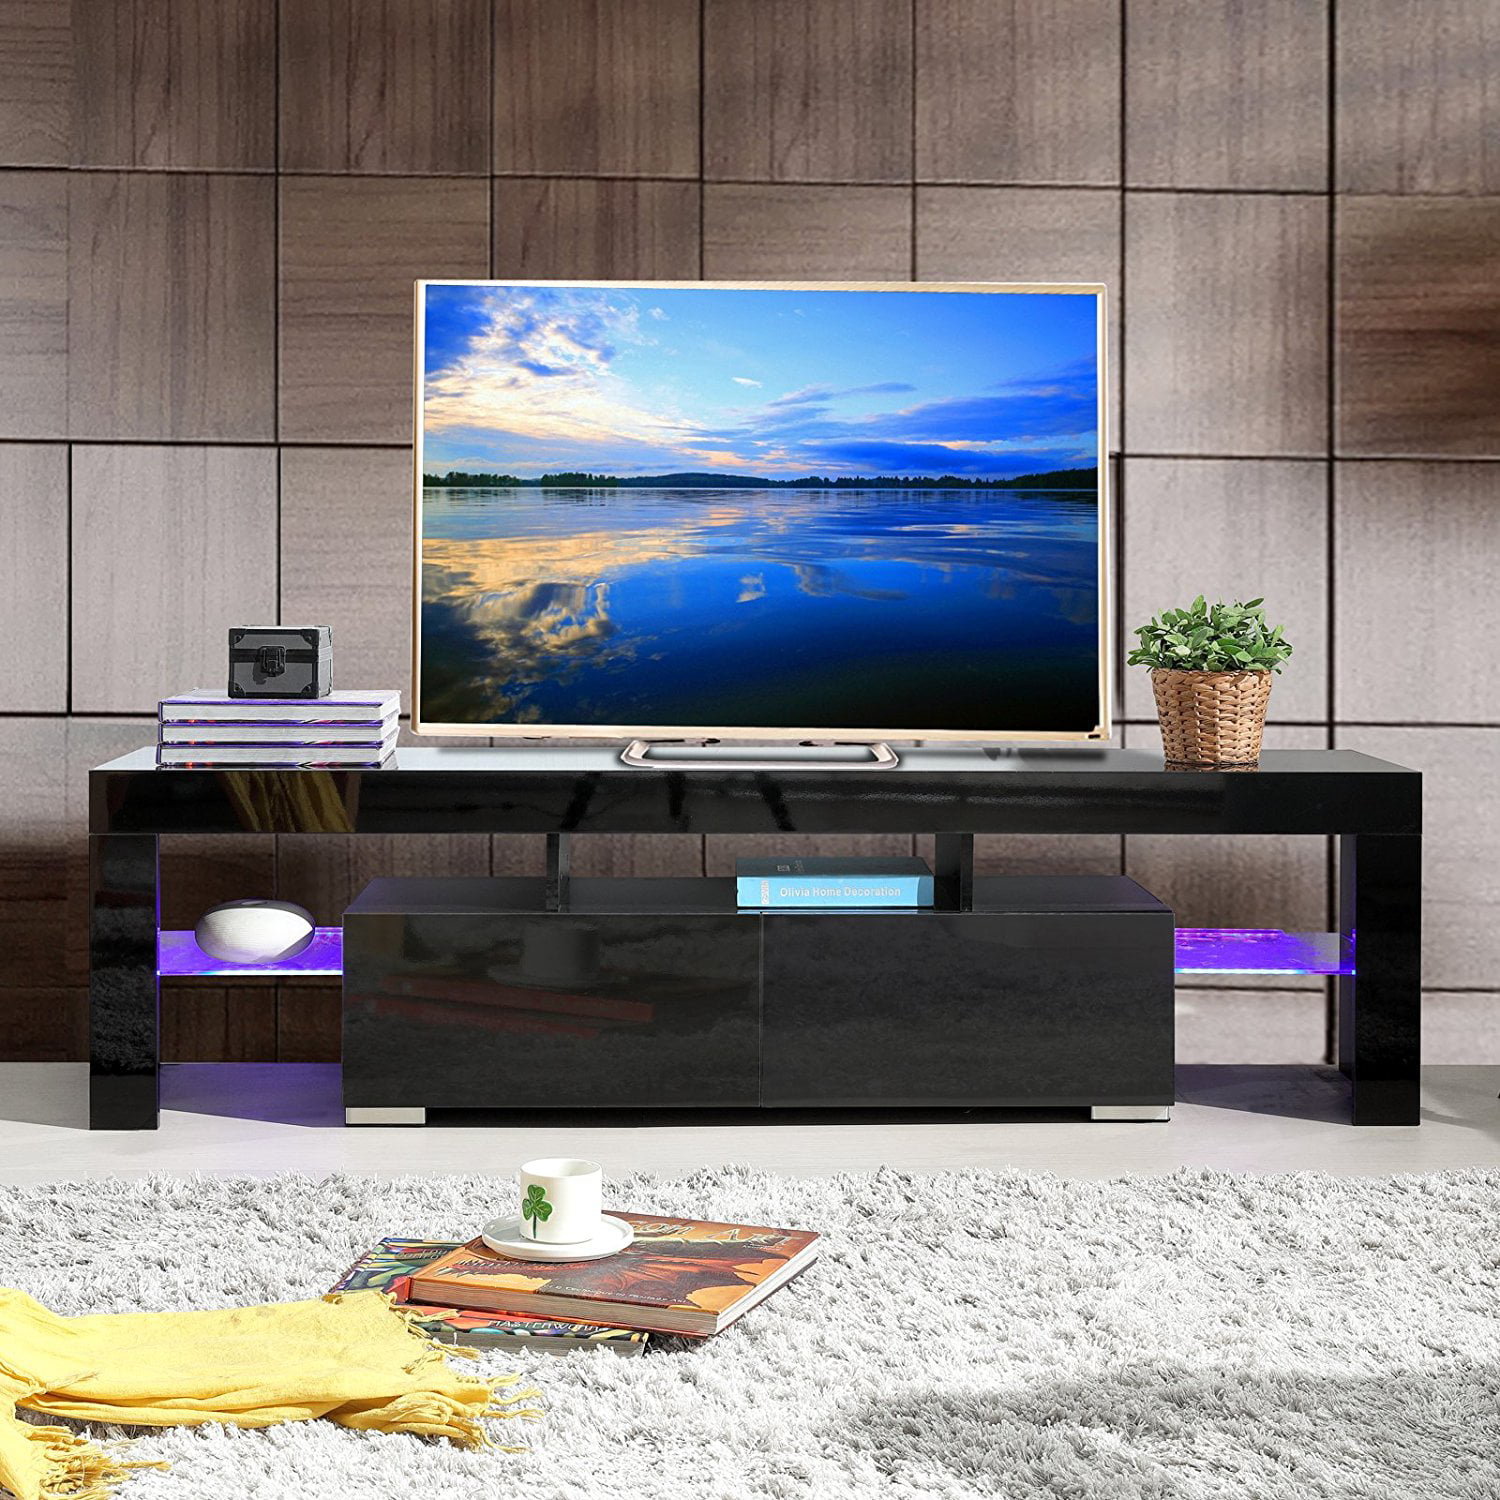 120 W x 40 D x 30 H cm LED TV Stand Storage Table with 16 Colors RGB Strip Lights for Living Room Size Leisure Zone Modern White Gloss and Matt TV Unit Cabinet